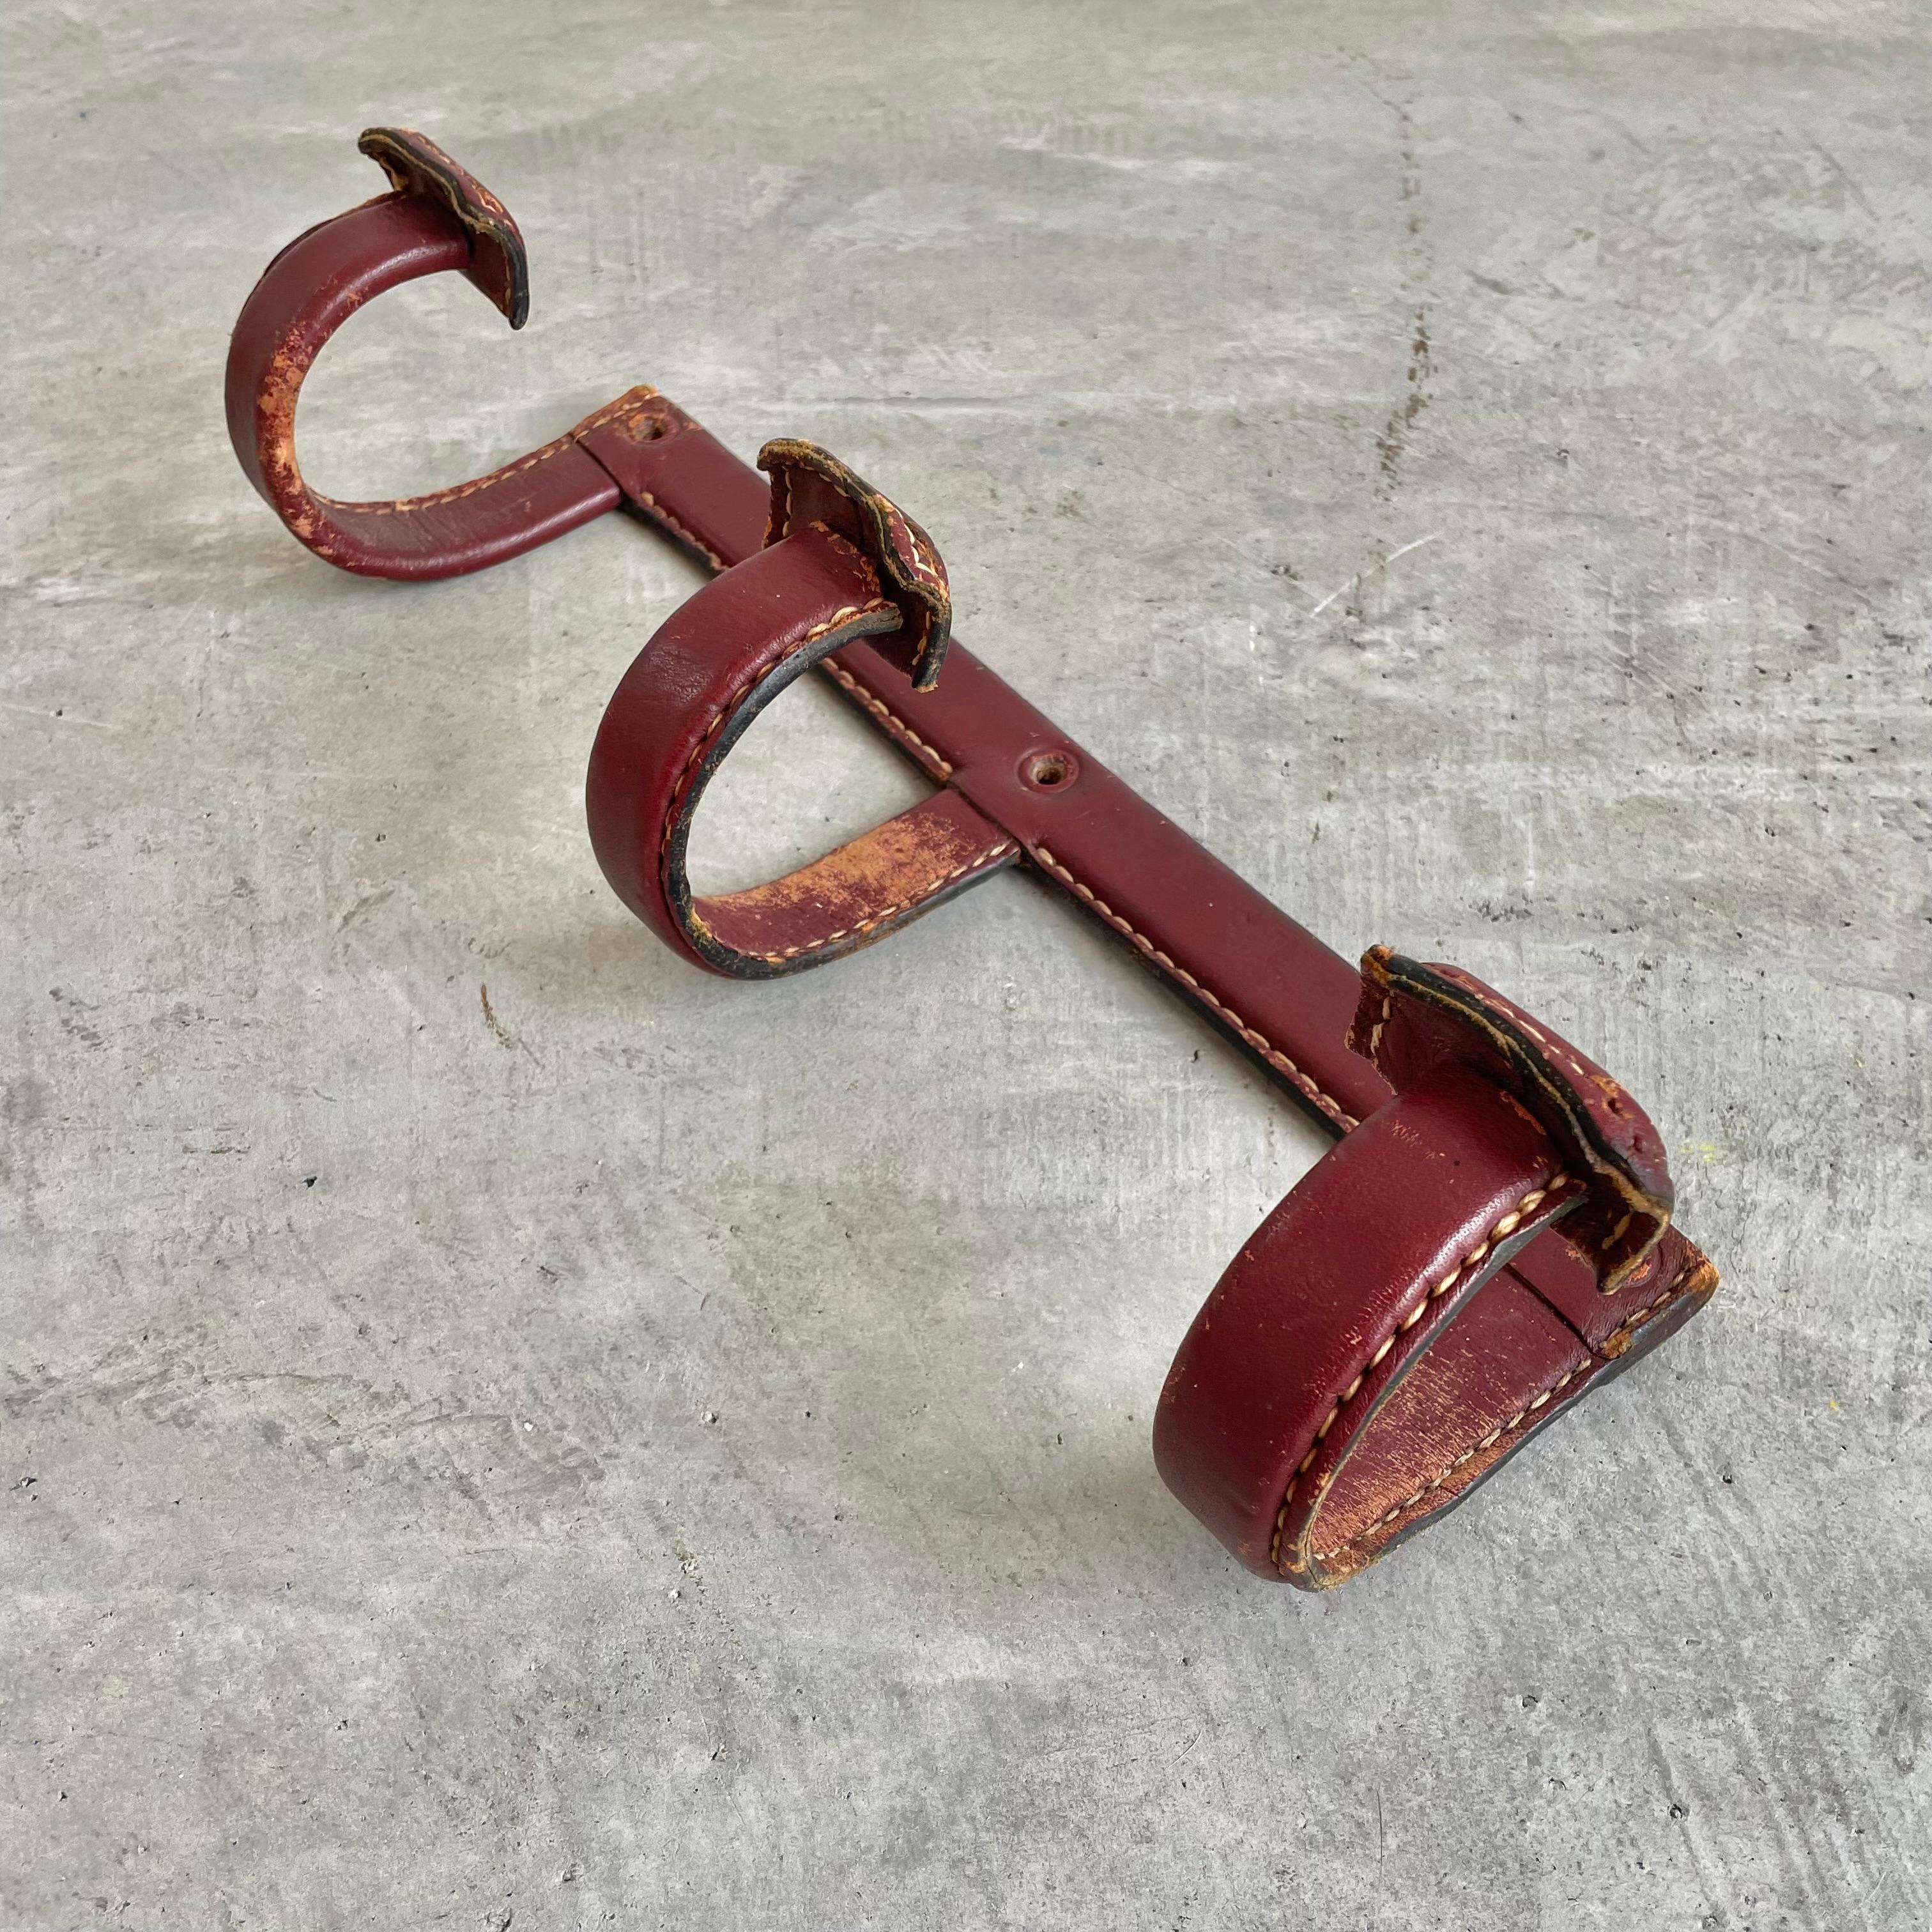 Handsome triple hook coat rack by French designer Jacques Adnet.  Finished in a beautiful oxblood leather with light patina and fading. Frame made of solid iron and completely wrapped in leather. Every seam is stitched with Adnet's signature